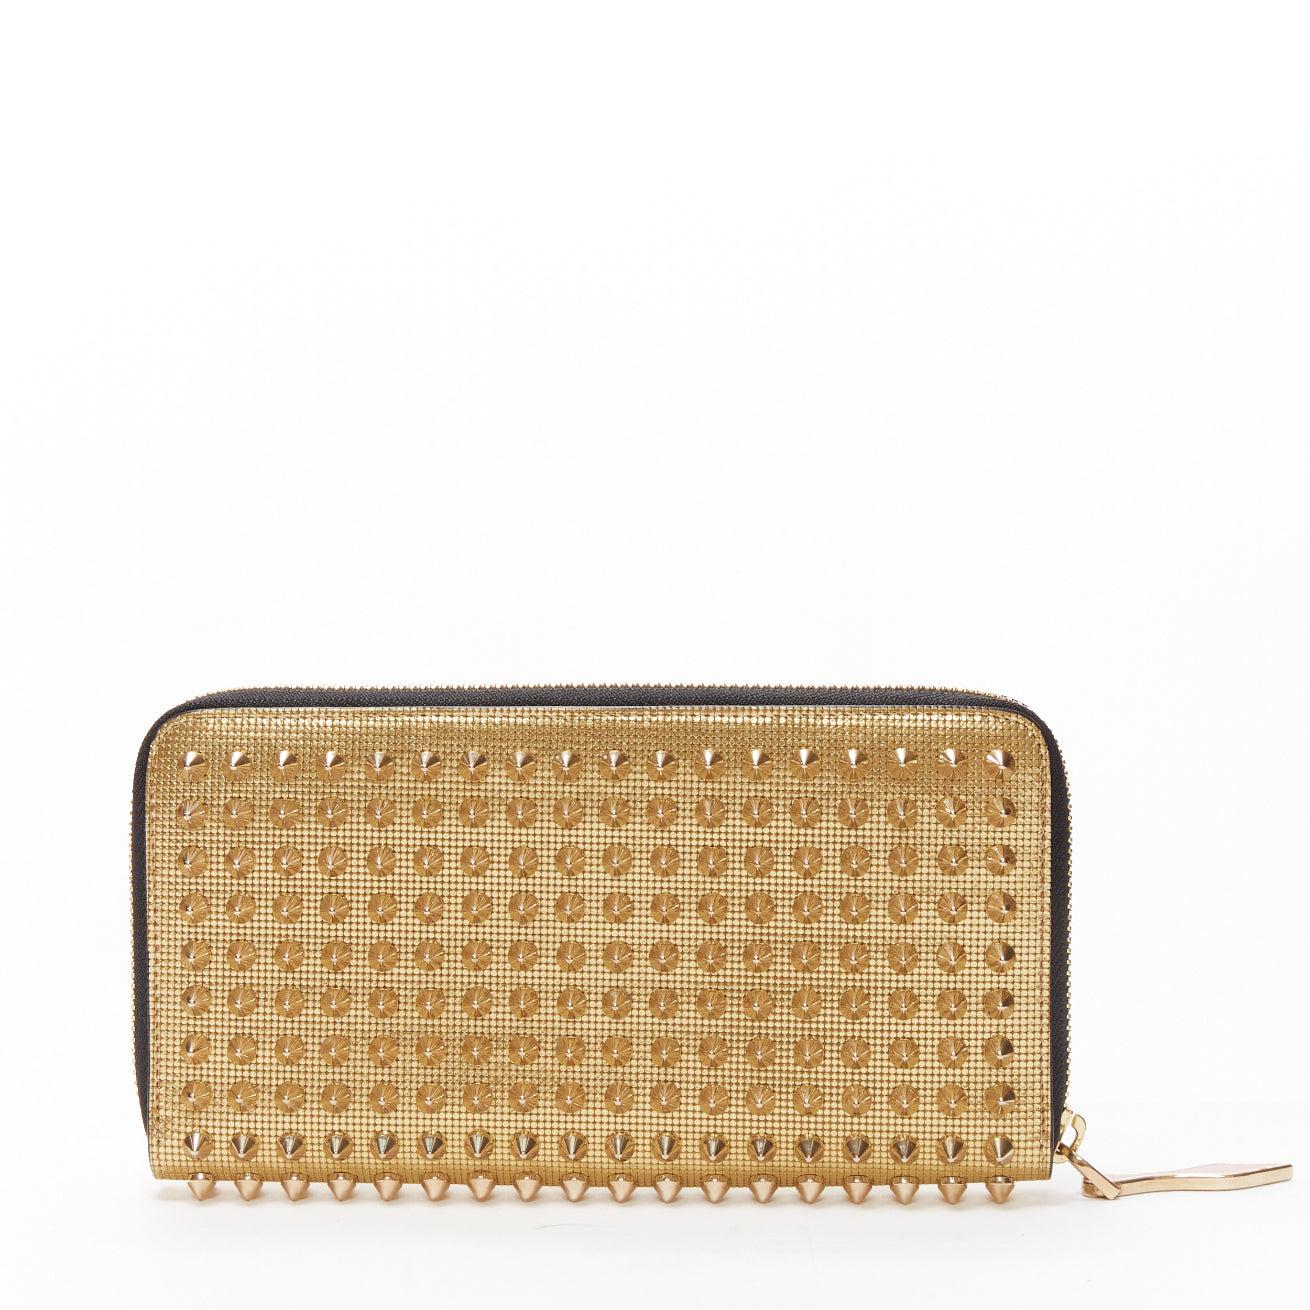 CHRISTIAN LOUBOUTIN Panettone gold studded leather zip around long wallet In Excellent Condition For Sale In Hong Kong, NT